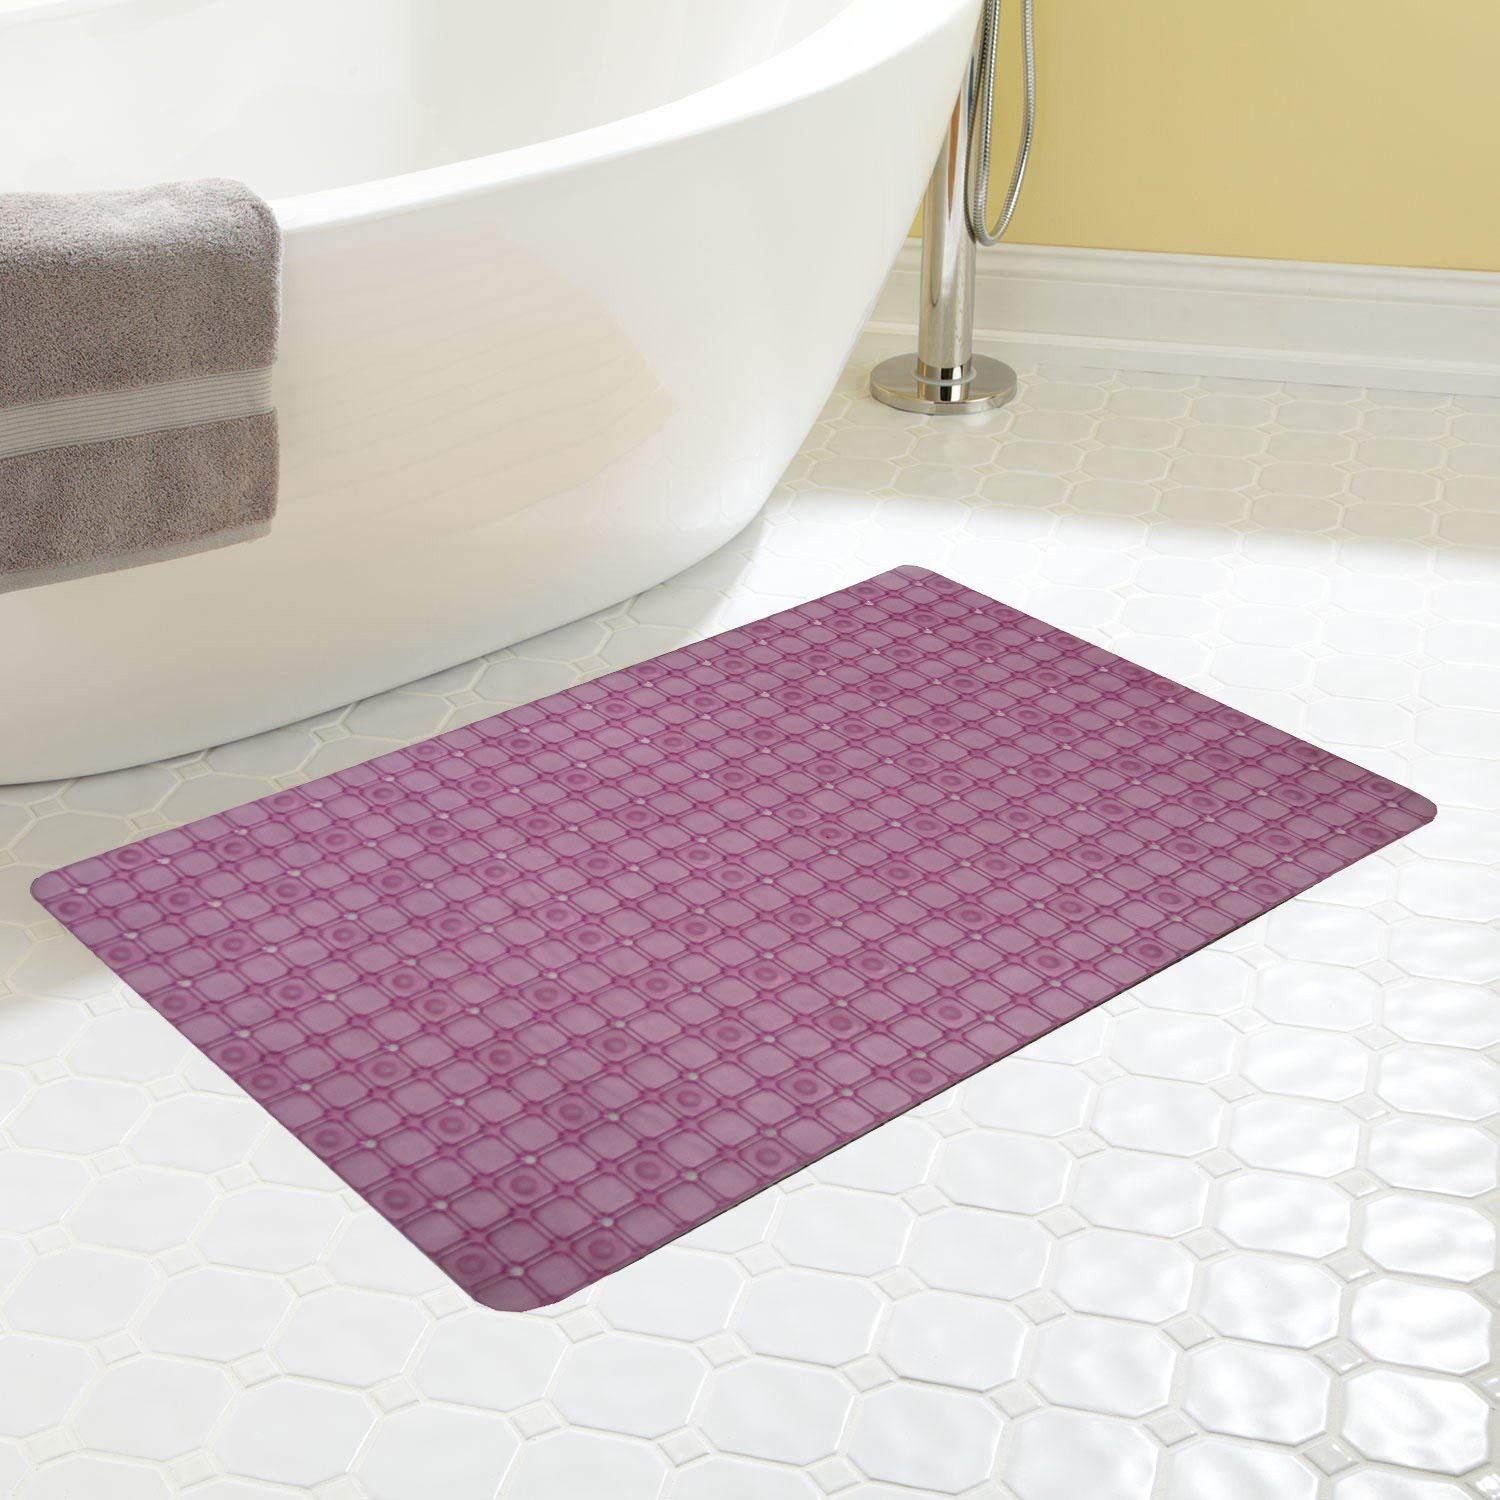 Kuber Industries Polyvinyl Chloride Floral Non Slip Bathroom Bathtub Shower Bath Mat with Suction Cups (Assorted Design and Color, Standard)